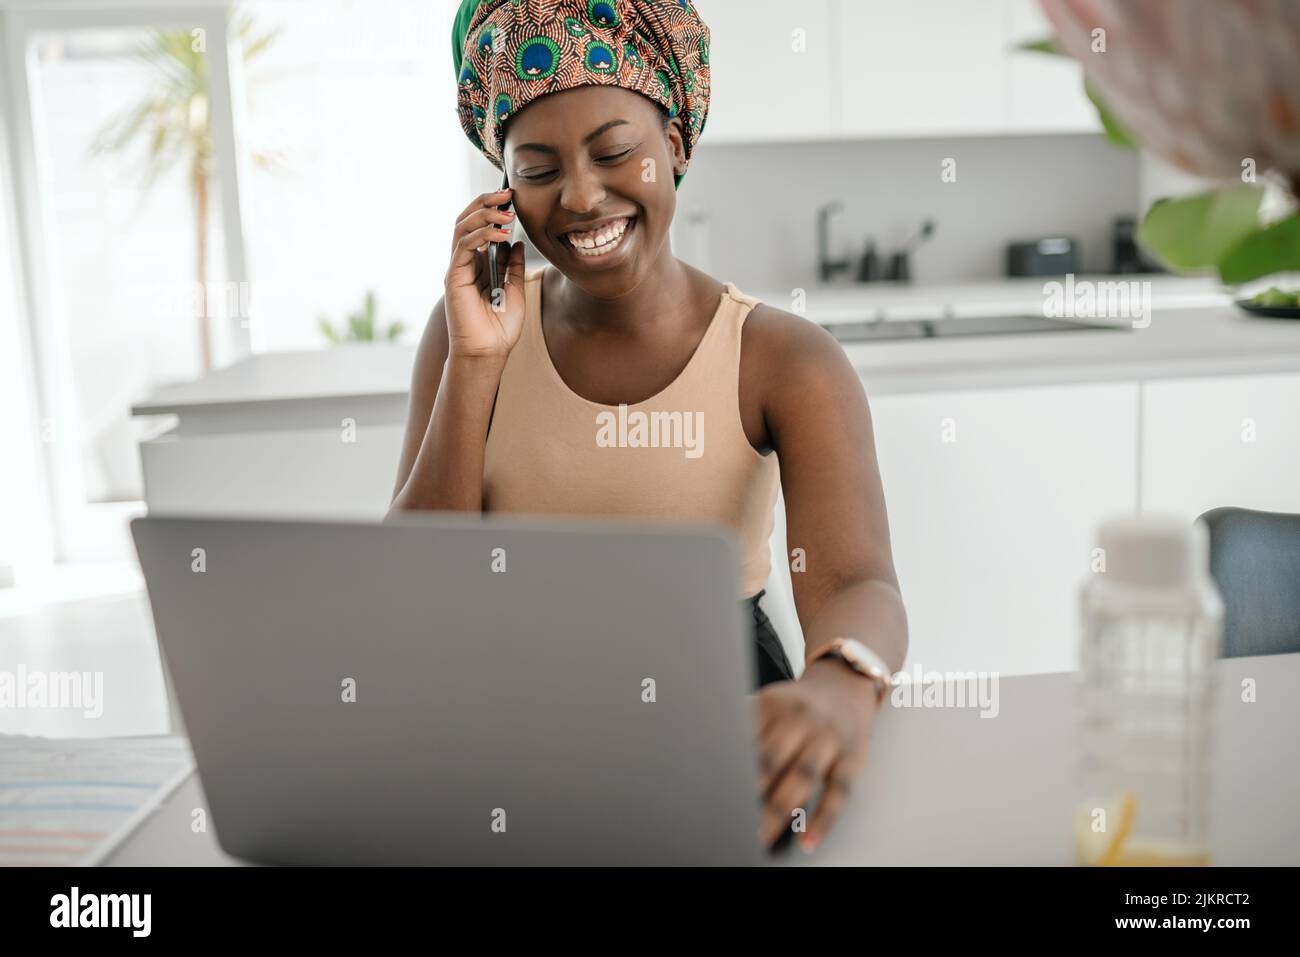 Beautiful young African woman wearing tradition headscarf. Sitting at home working on laptop. On phone call smiling and gesturing with hand Stock Photo